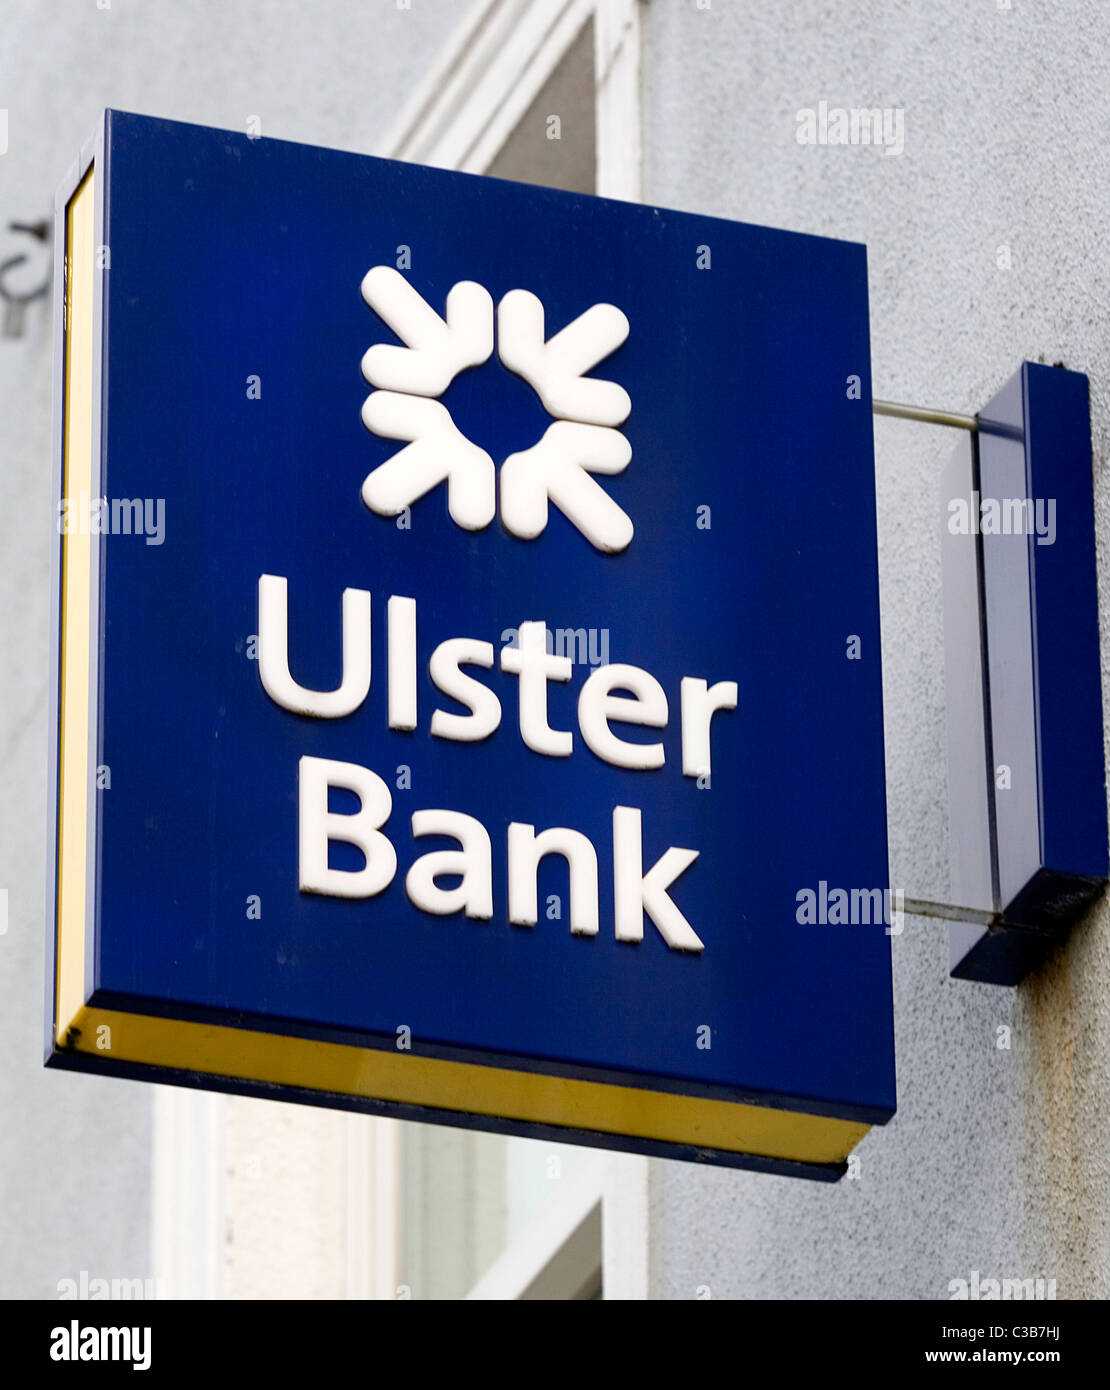 A Branch of the Ulster Bank, Roscommon, West of Ireland. Stock Photo